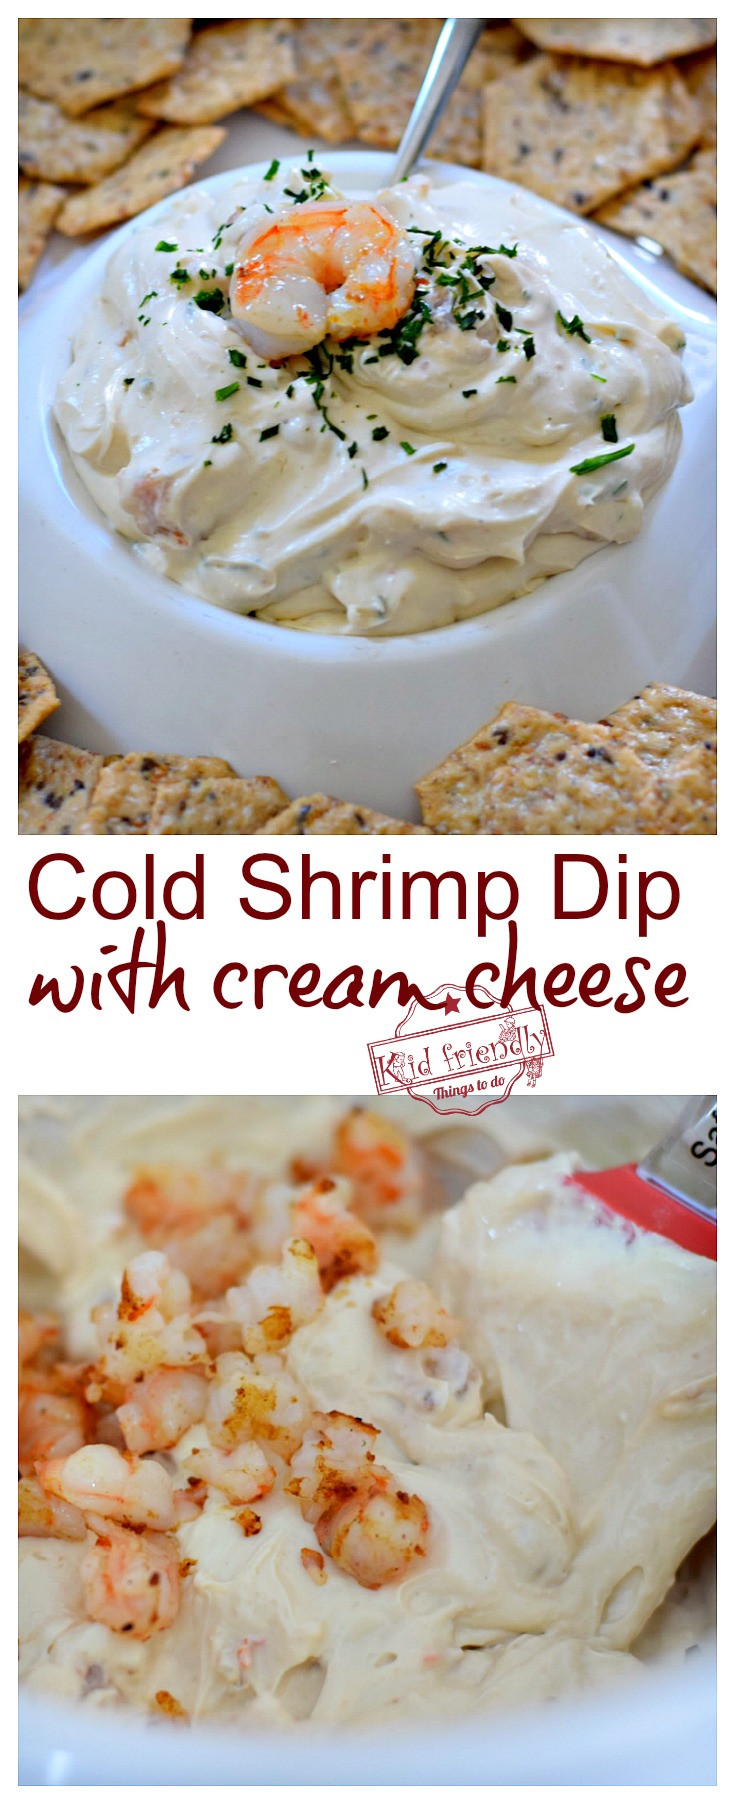 Cold Shrimp Recipes Appetizers
 The Best Cold Shrimp Dip Recipe With Cream Cheese